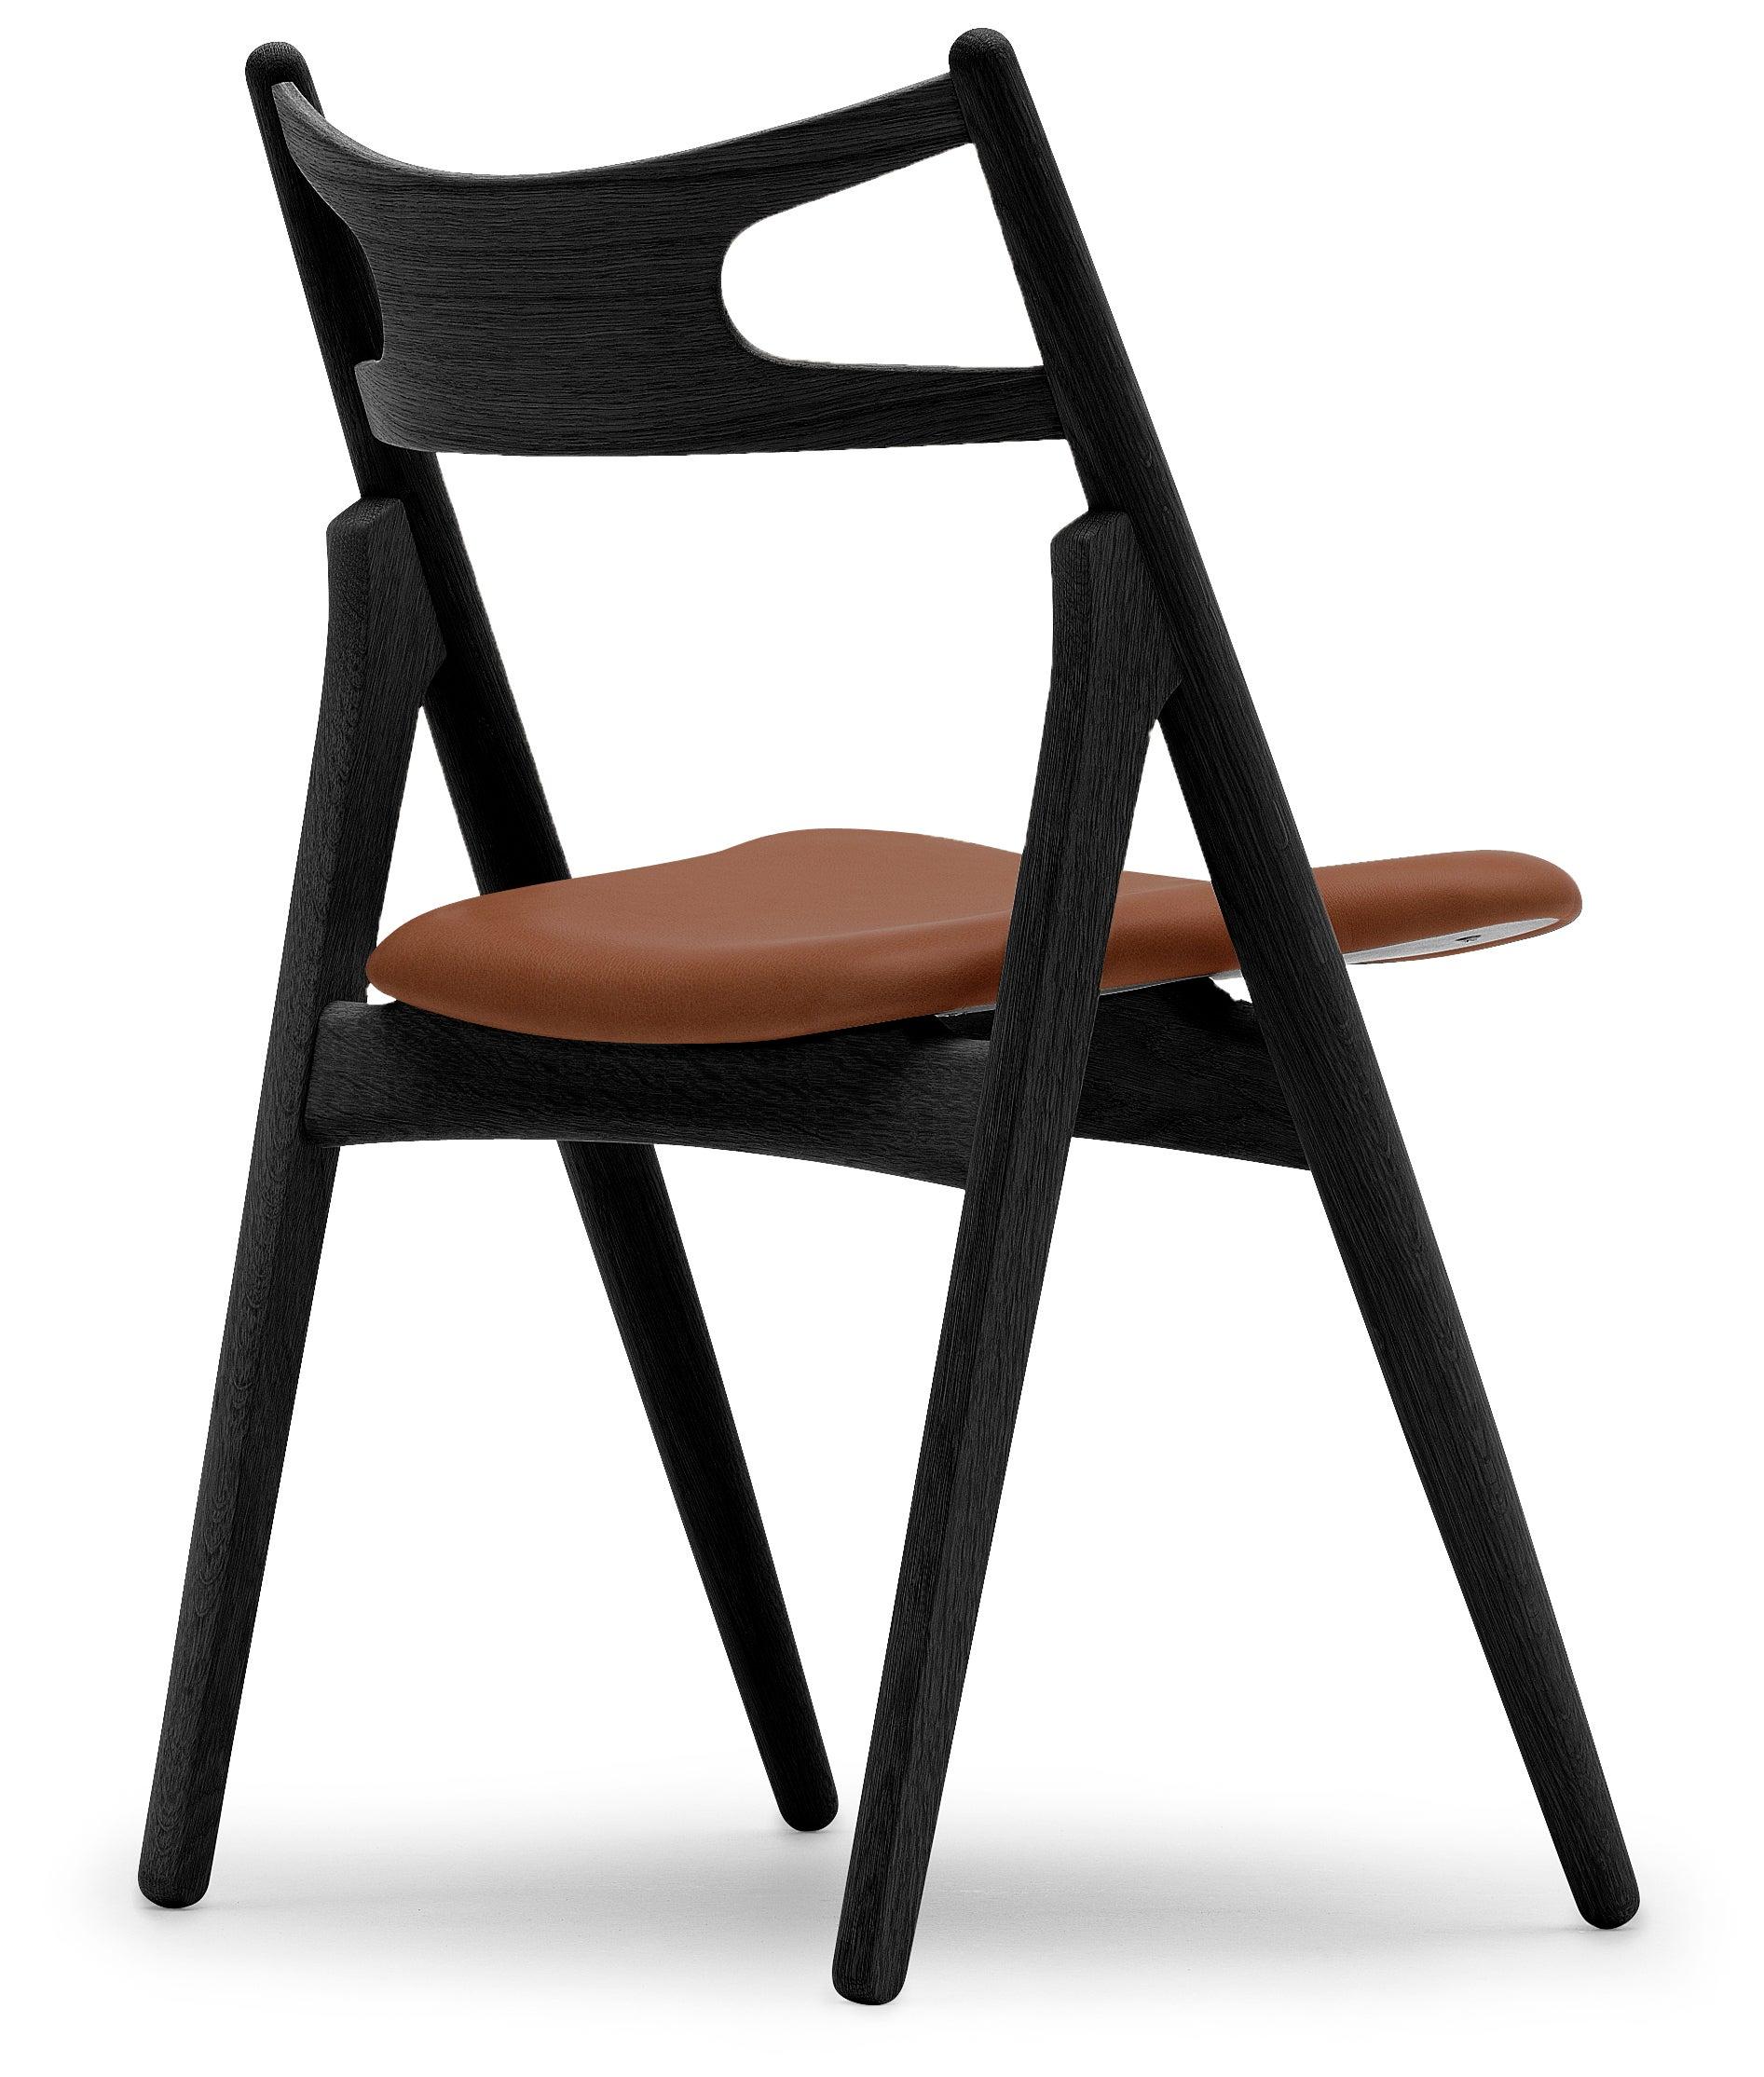 The CH29P Sawbuck chair, designed by Hans J. Wegner, has clean, simple lines and a unique construction. The seat is significantly wider at the front, and - along with the very curved back â€“ingeniously enhances comfort in various sitting positions